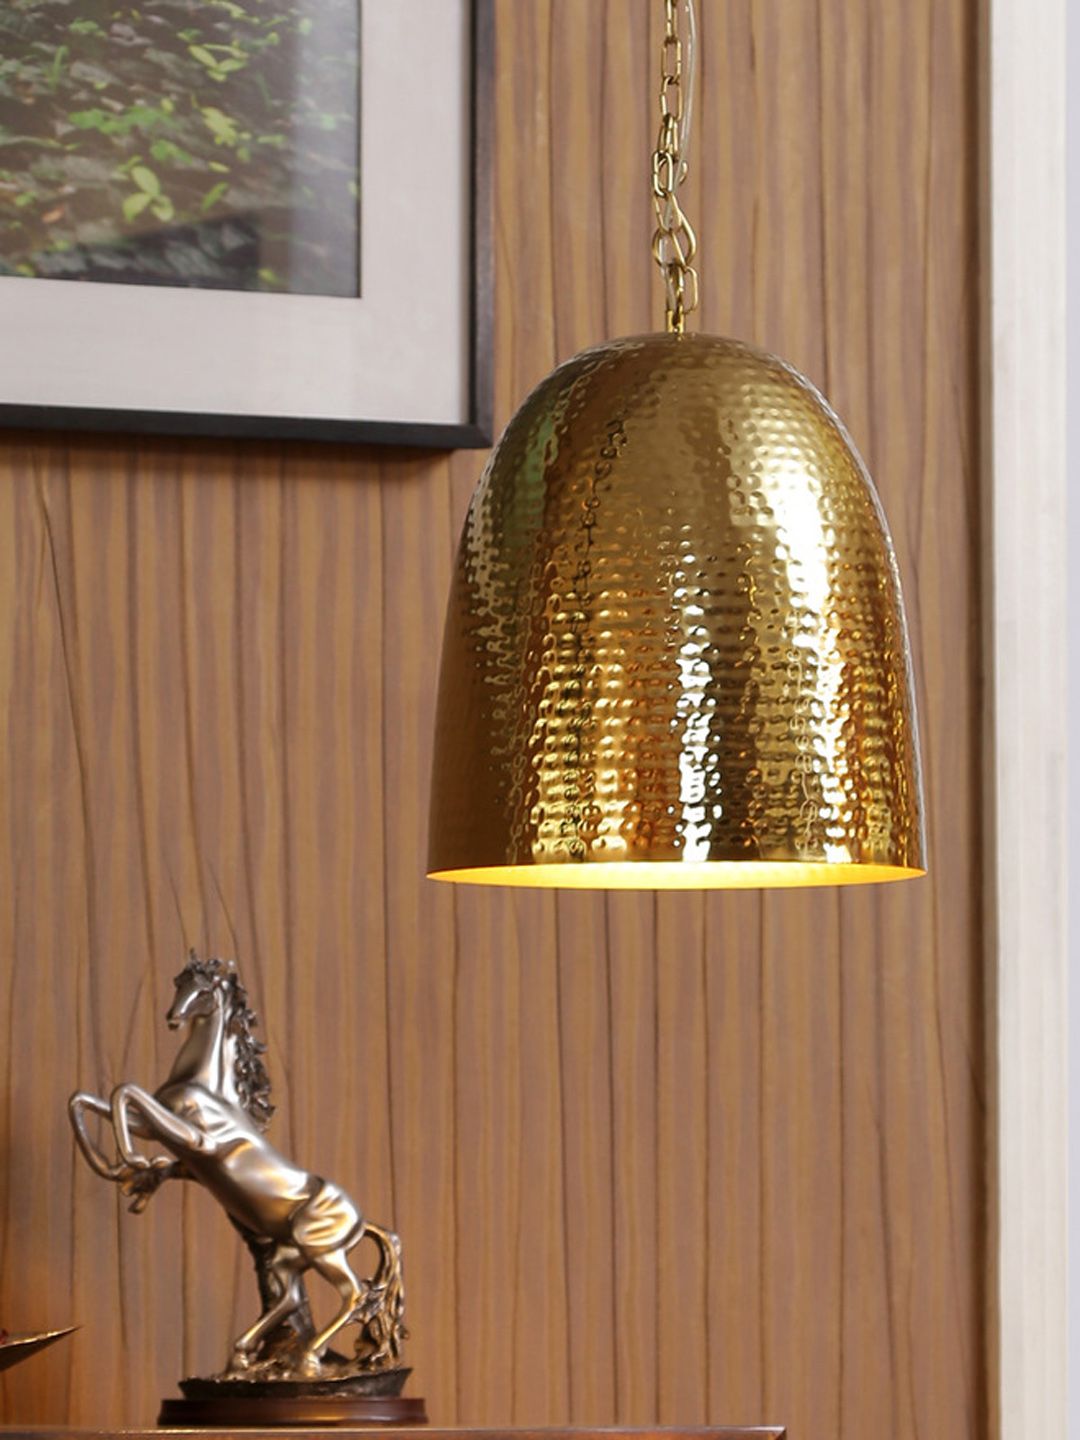 THE LIGHT STORE Gold-Toned Textured Pendant Hanging Lamp Price in India